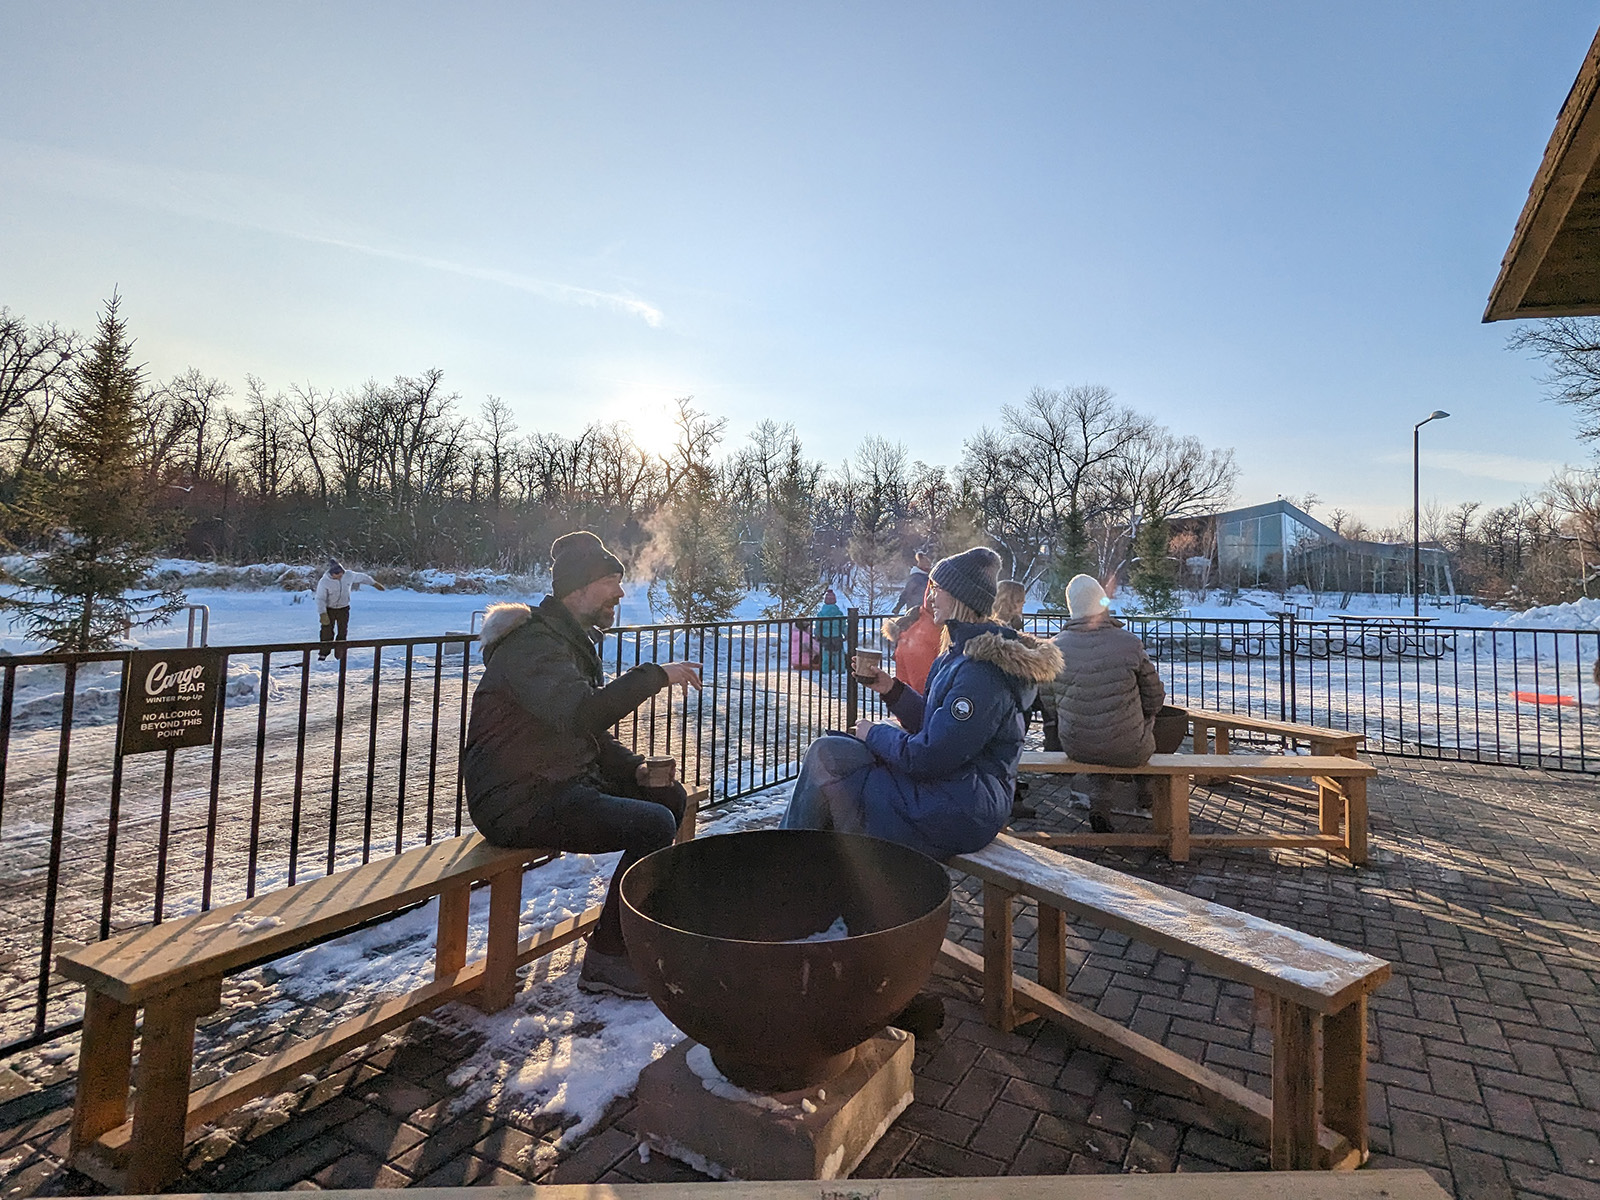 small group of people sitting around an outdoor winter firepit